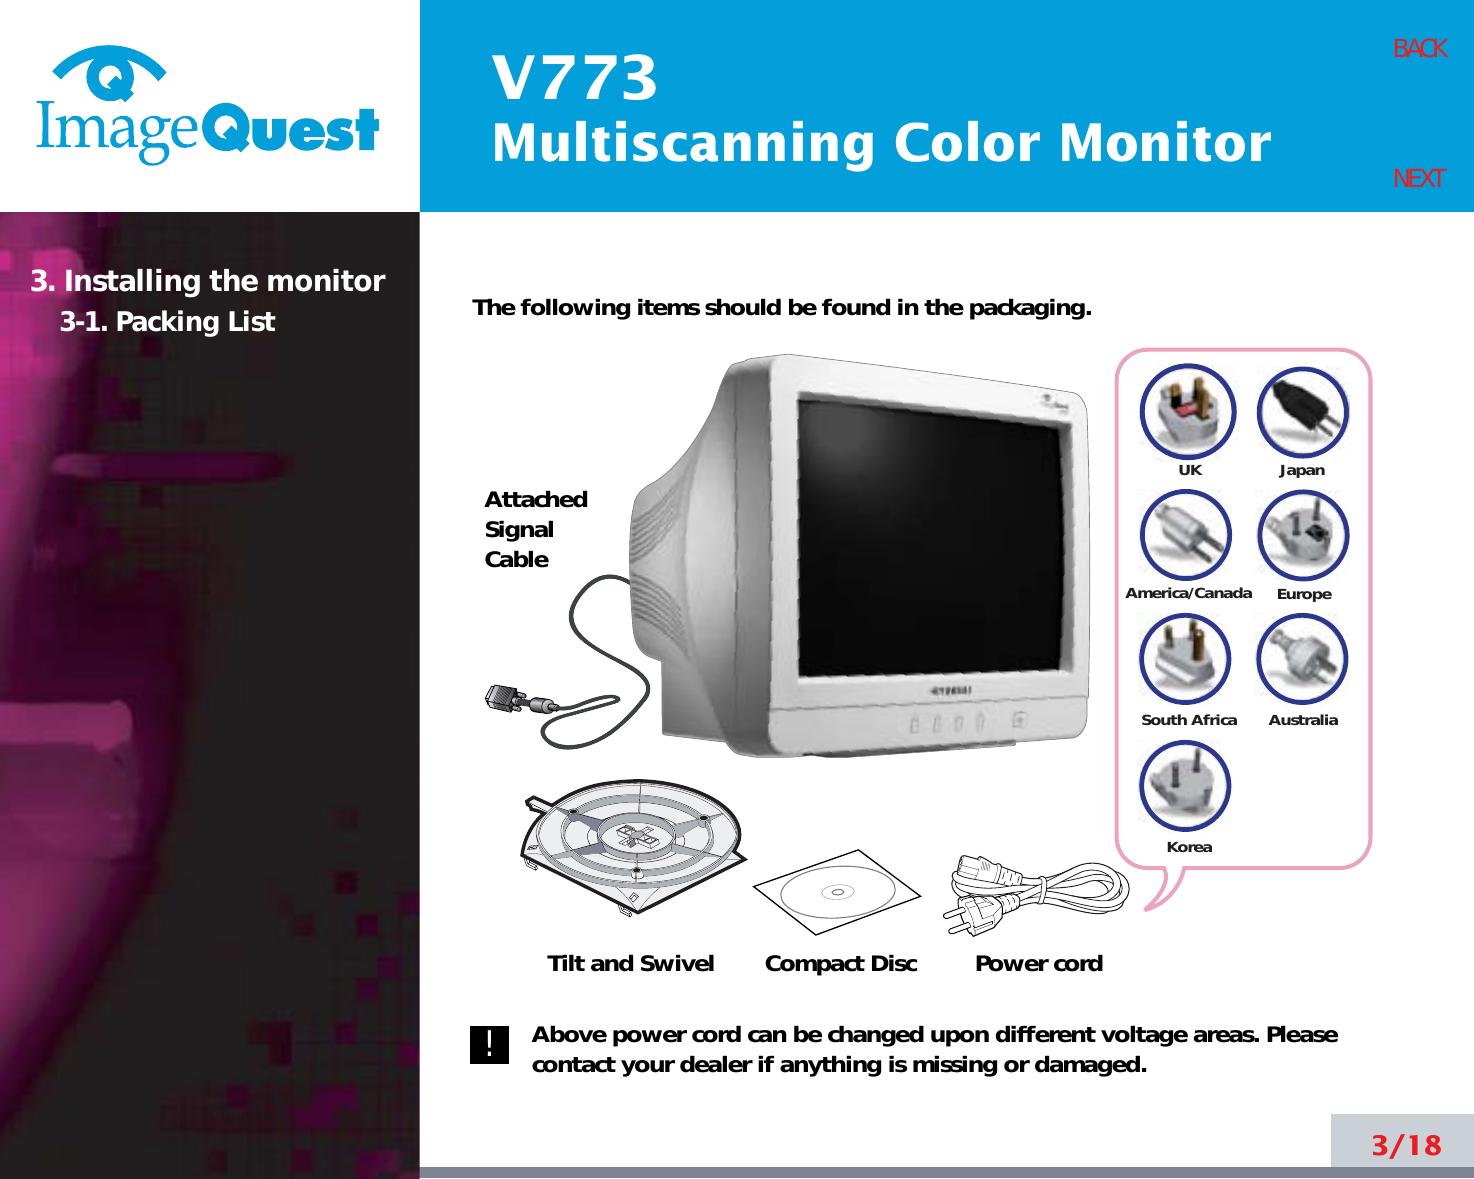 V773Multiscanning Color Monitor3/18BACKNEXT3. Installing the monitor3-1. Packing List The following items should be found in the packaging.Above power cord can be changed upon different voltage areas. Pleasecontact your dealer if anything is missing or damaged.UKAmerica/CanadaJapanAustraliaKoreaEuropeSouth AfricaAttachedSignalCableTilt and Swivel Compact Disc Power cord!